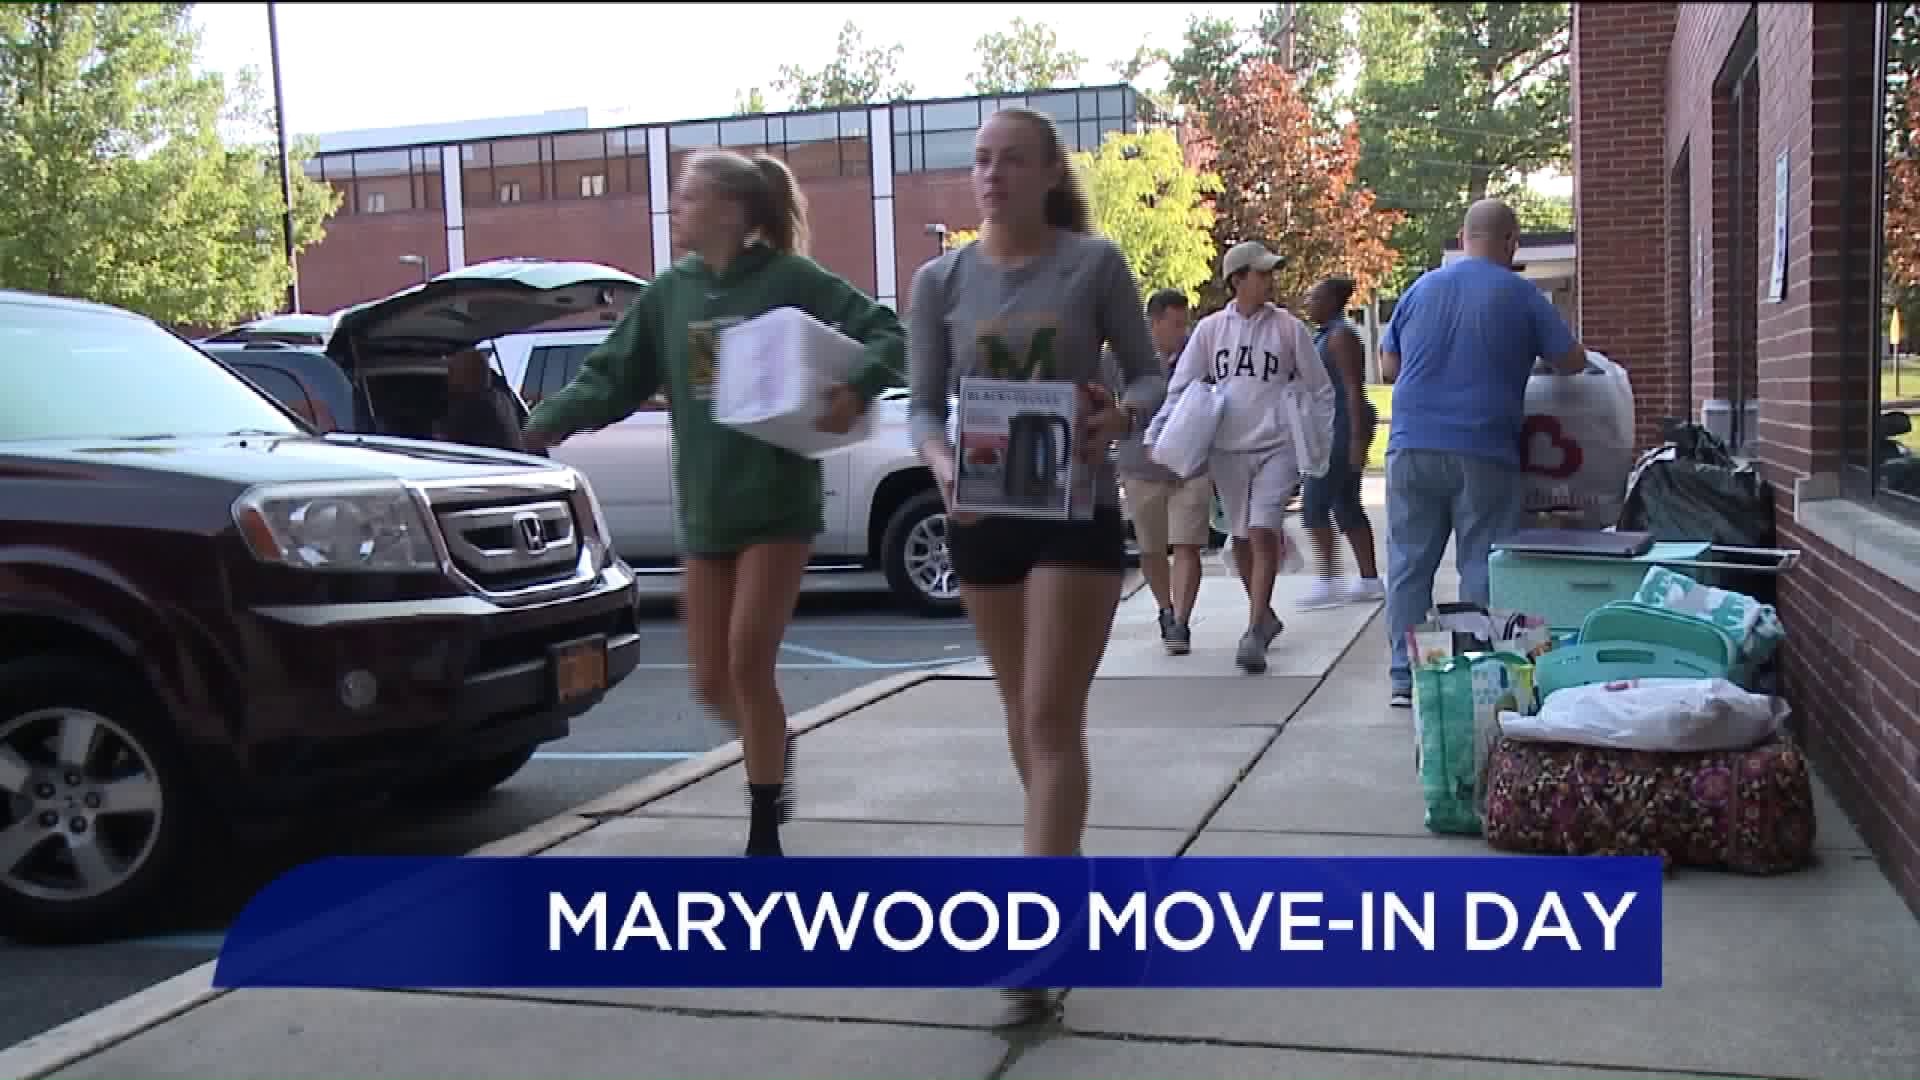 Marywood Move-In Day